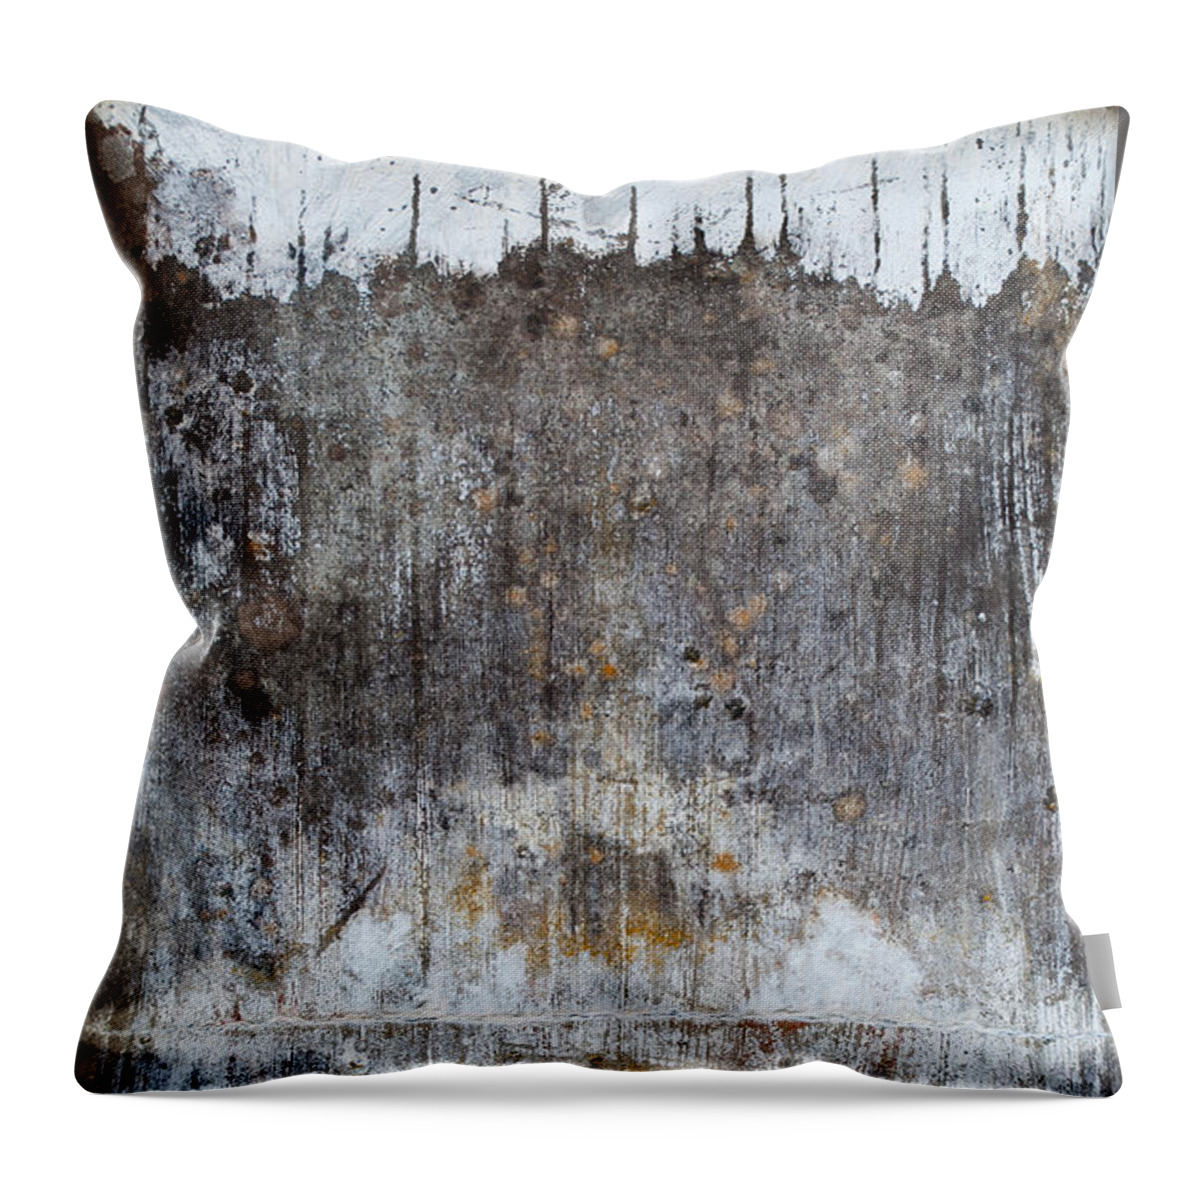 Shades Of Gray Throw Pillow featuring the photograph Snowy Mountain Top And Lake by Jani Freimann